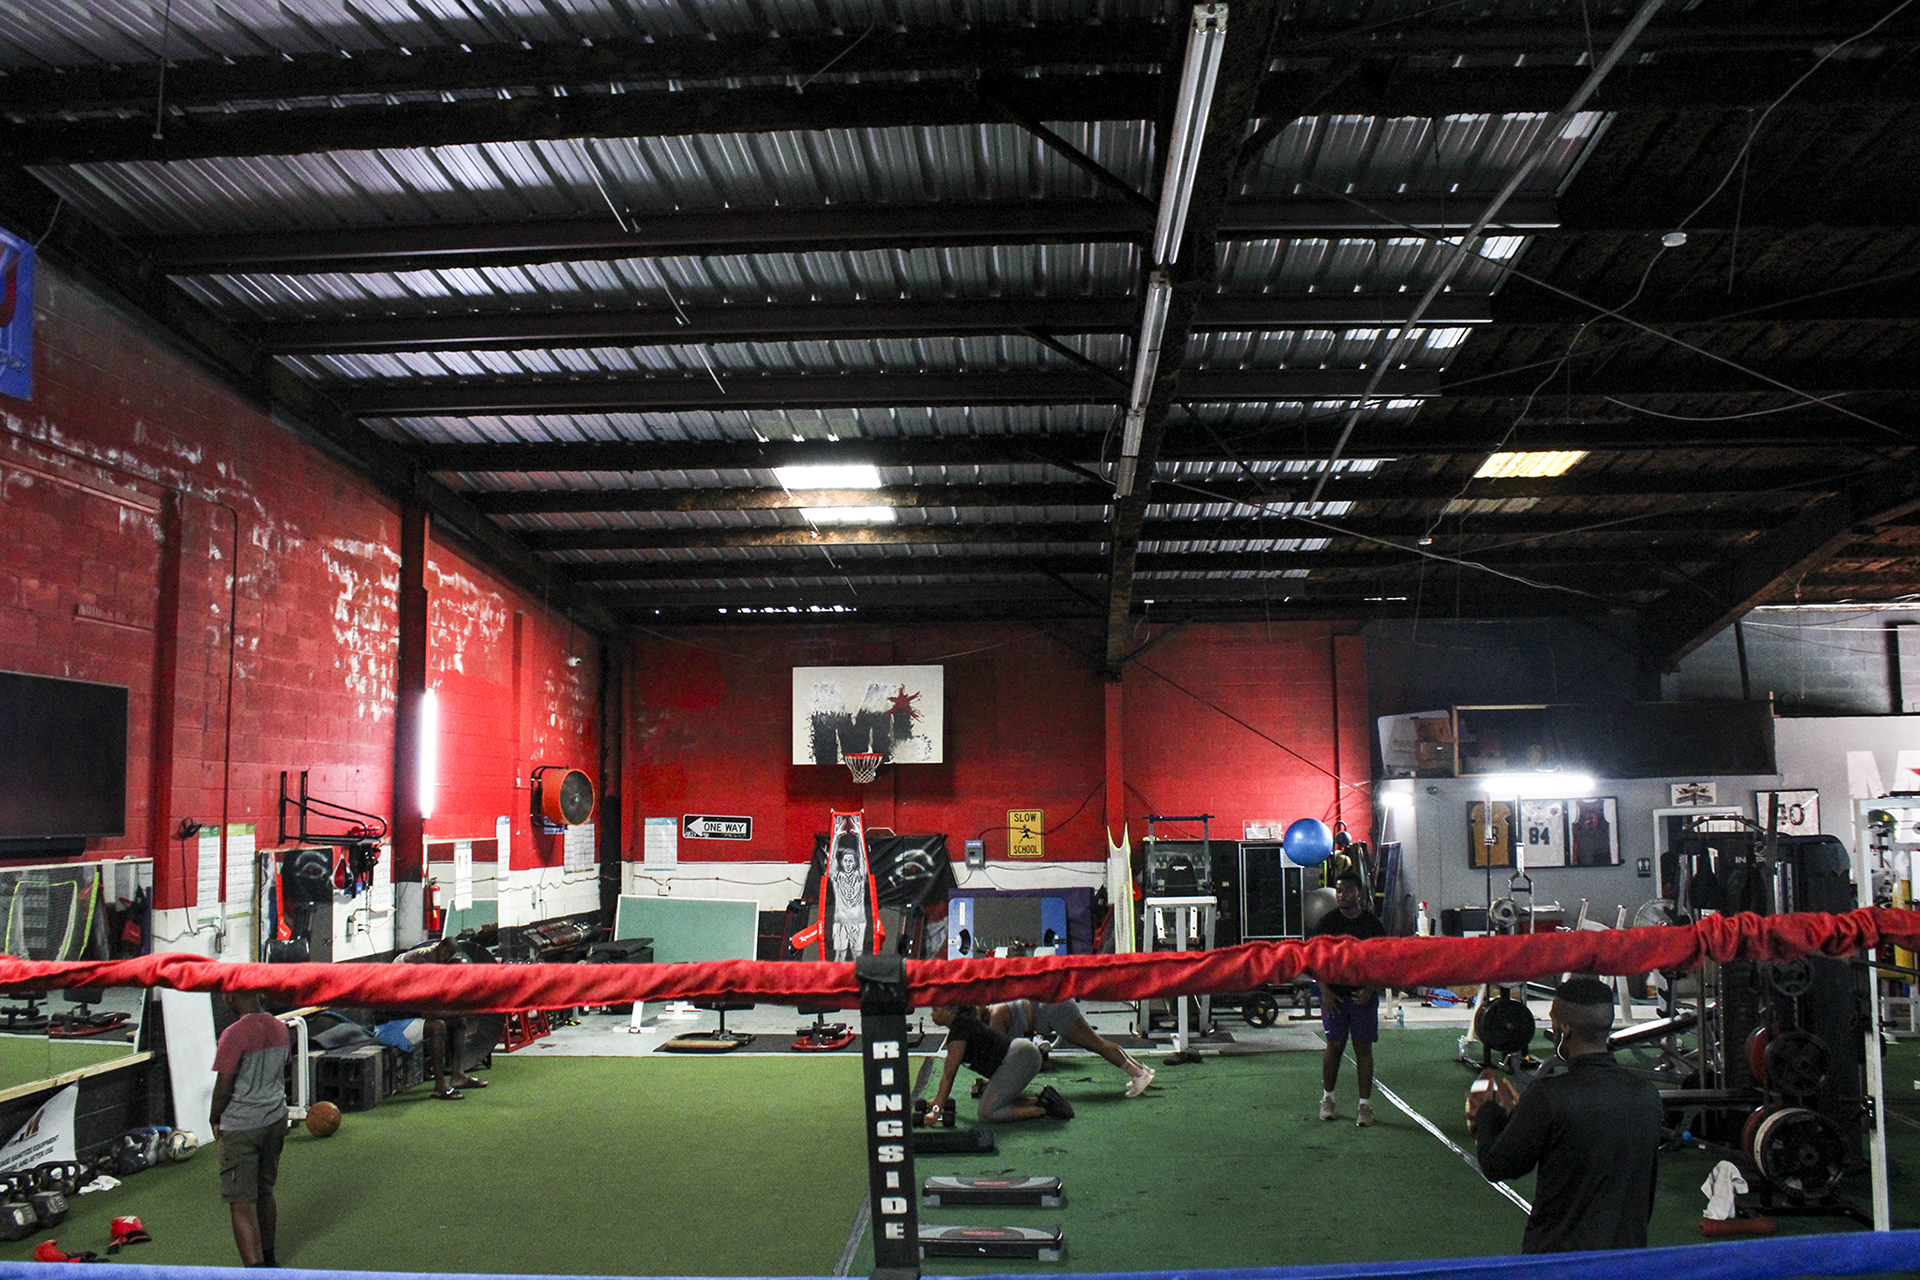 Red and blue ropes from inside a boxing ring in MT Athletics in Uptown New Orleans. The walls are red, the ceilings are black, the floor is green, there is a basketball hoop hanging up and there are people exercising.